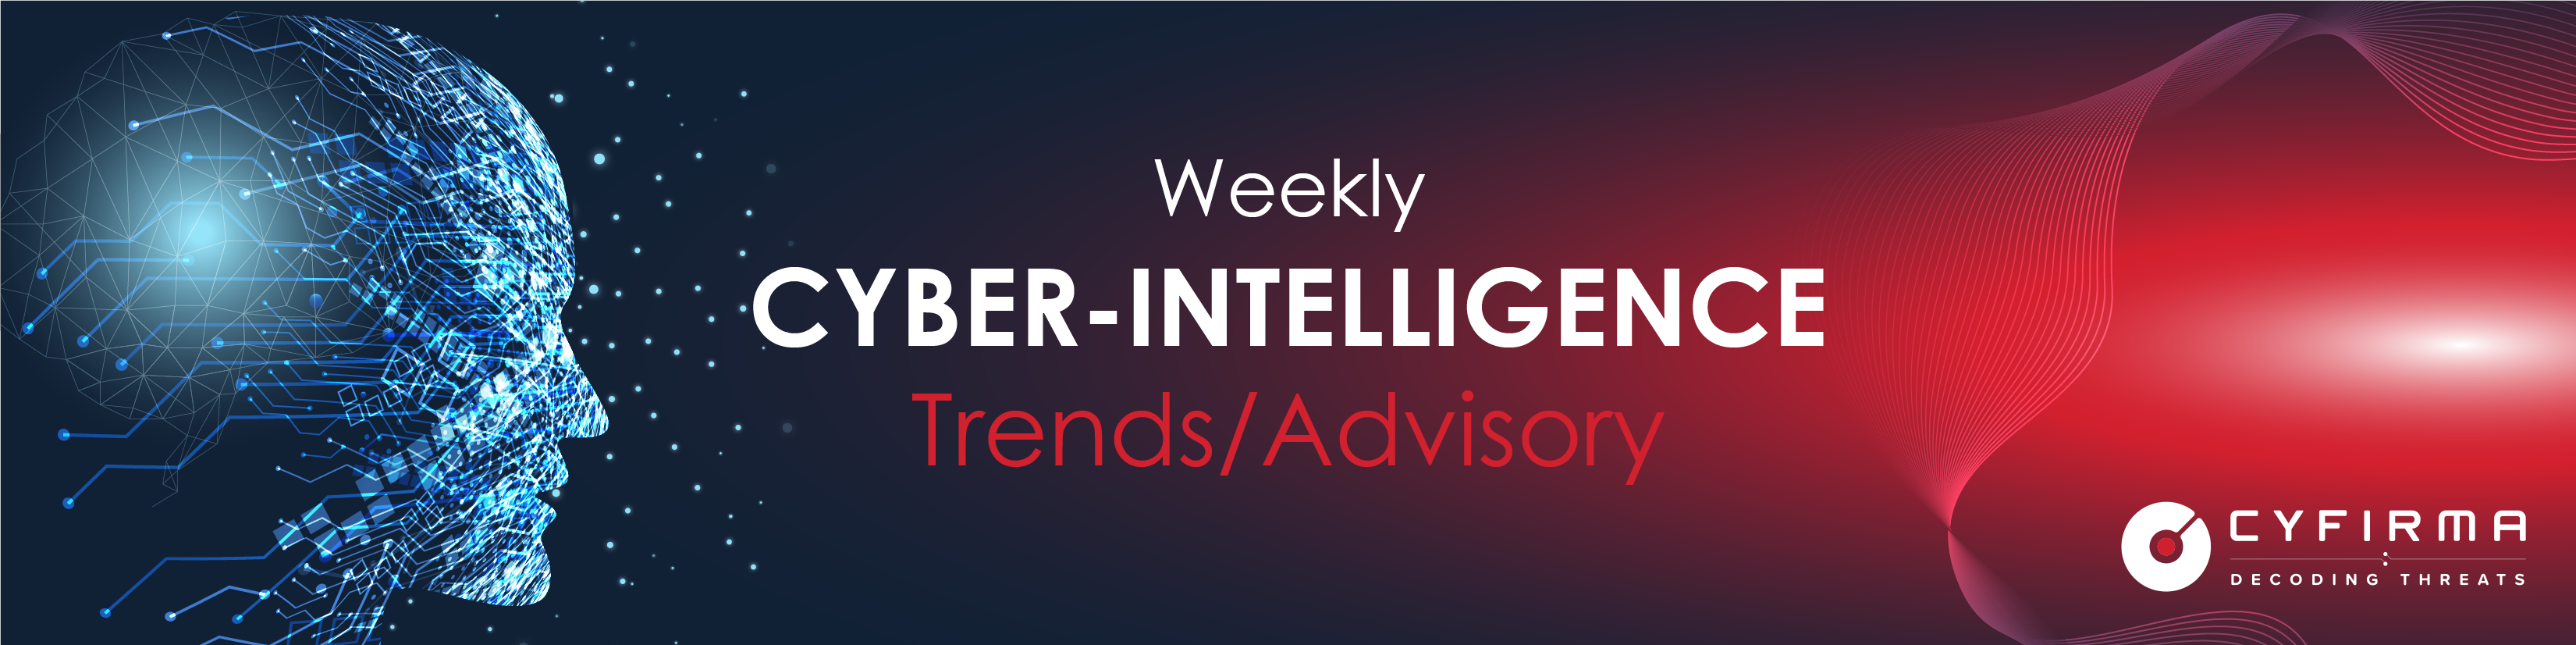 Weekly Cyber-Intelligence Trends and Advisory – 27 Mar 2022